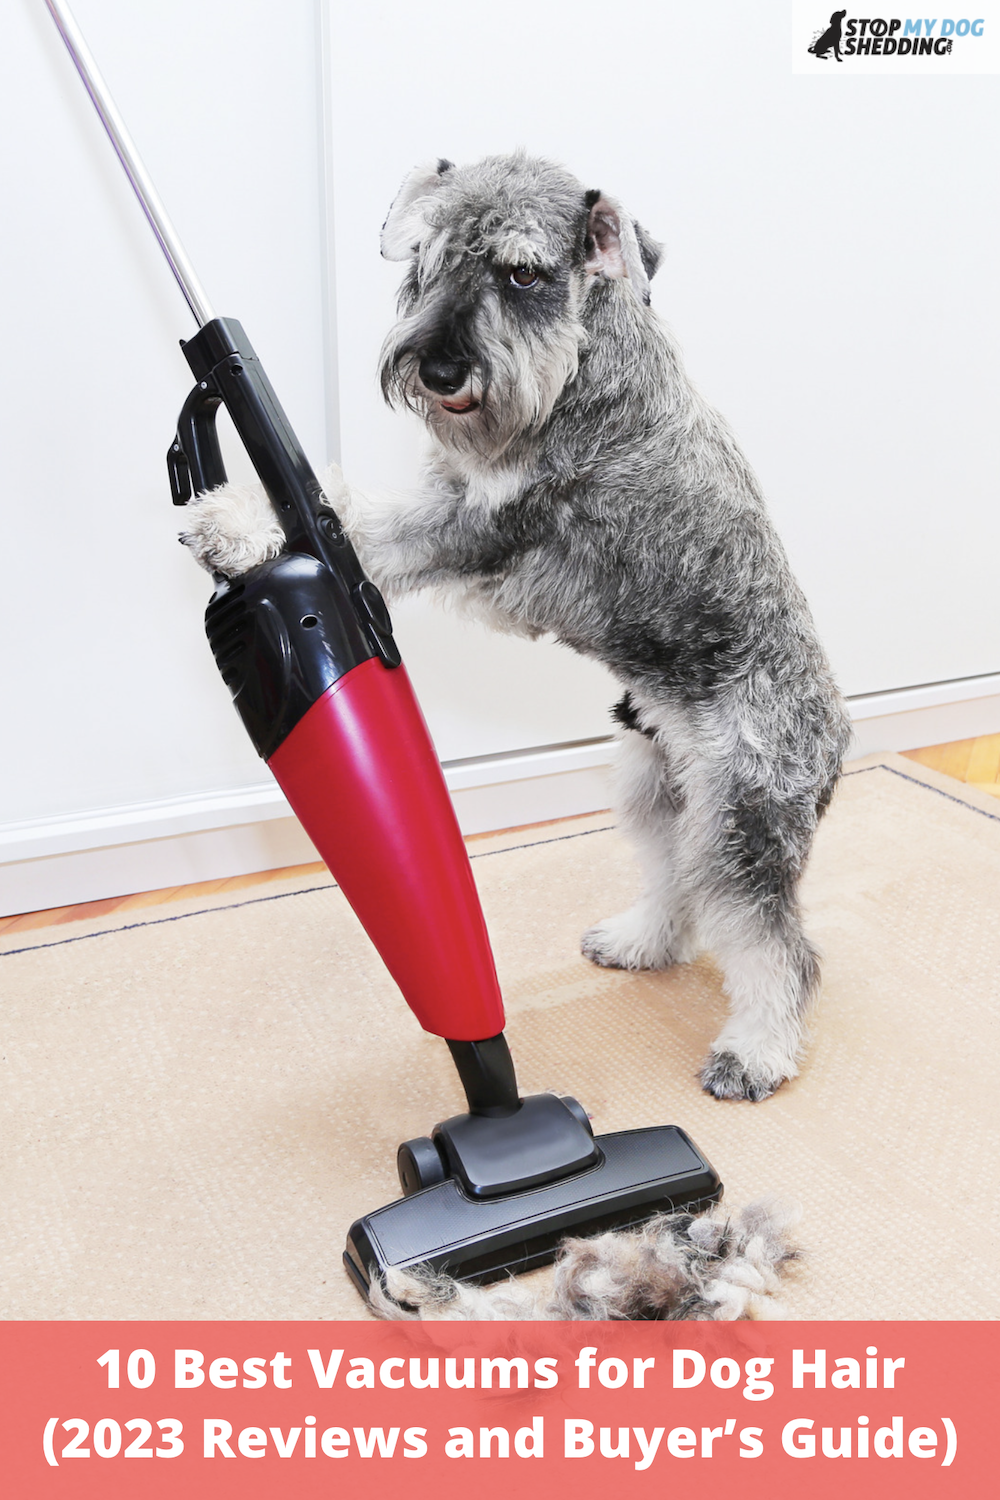 10 Best Vacuums for Dog Hair (2023 Reviews and Buyer’s Guide)